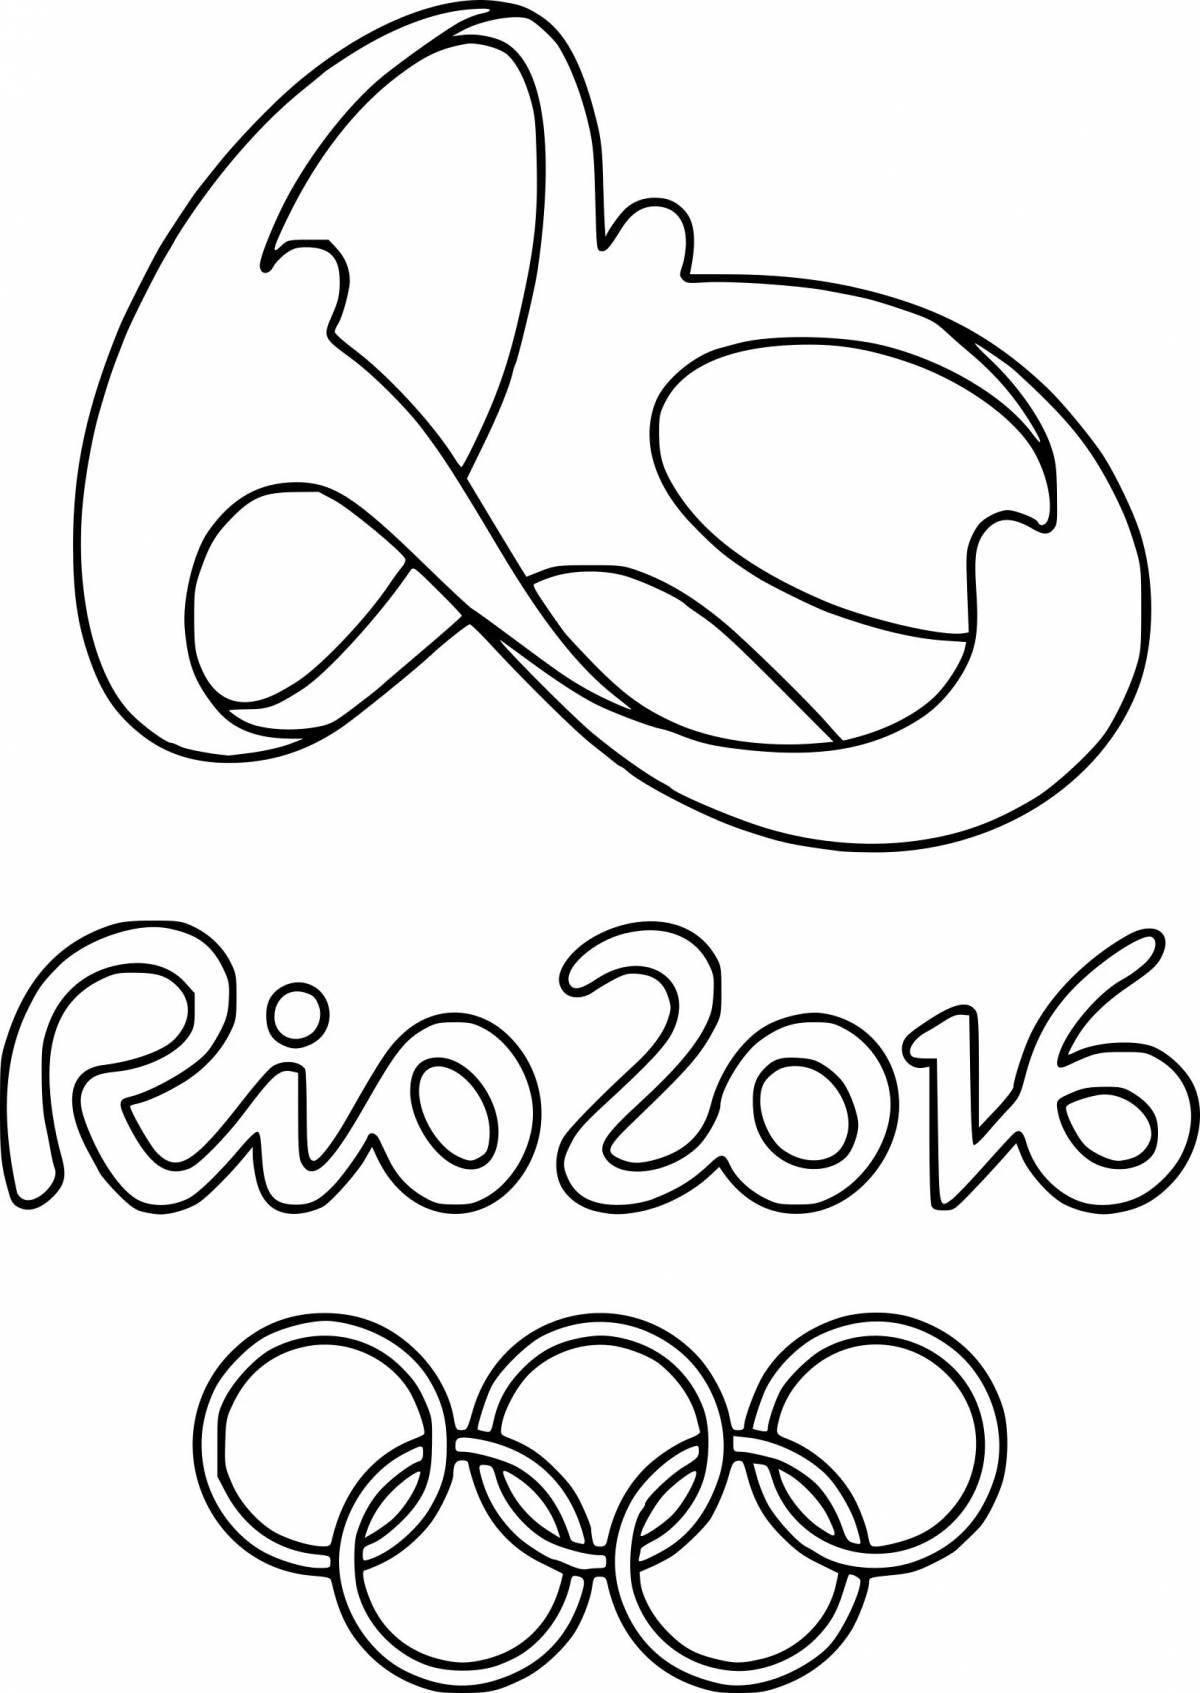 Coloring book shining rings of the olympic games